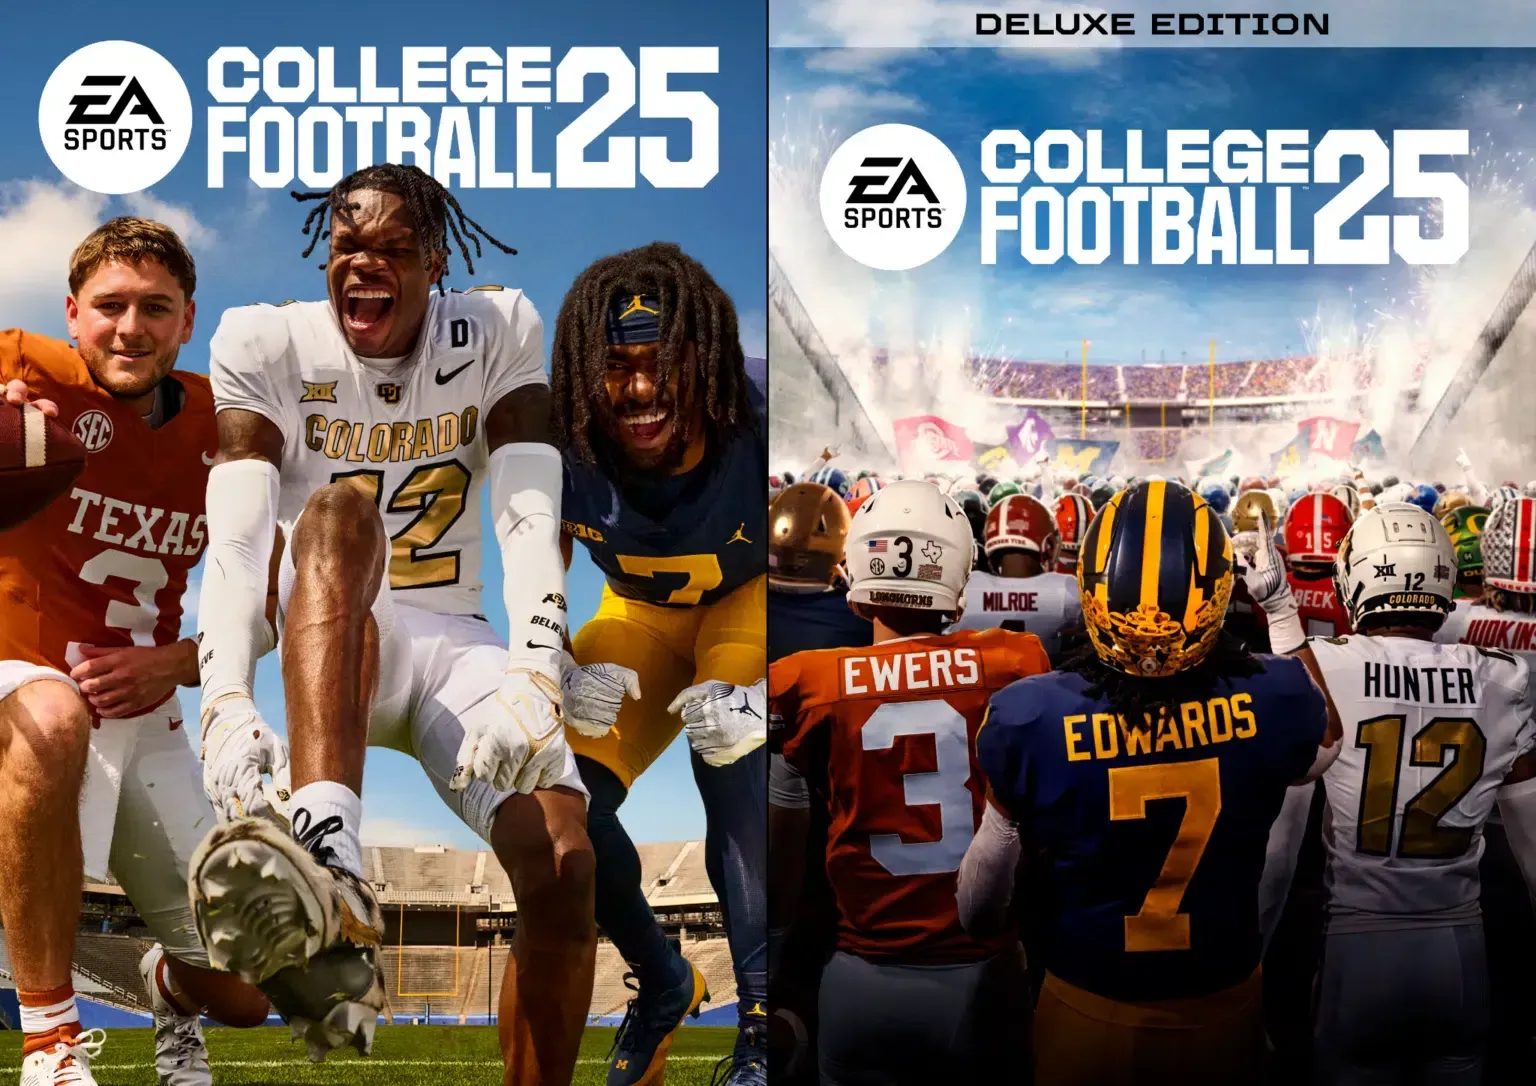 EA Sports College Football 25 Official Cover Athletes Revealed and Pre-Order Bonuses Announced